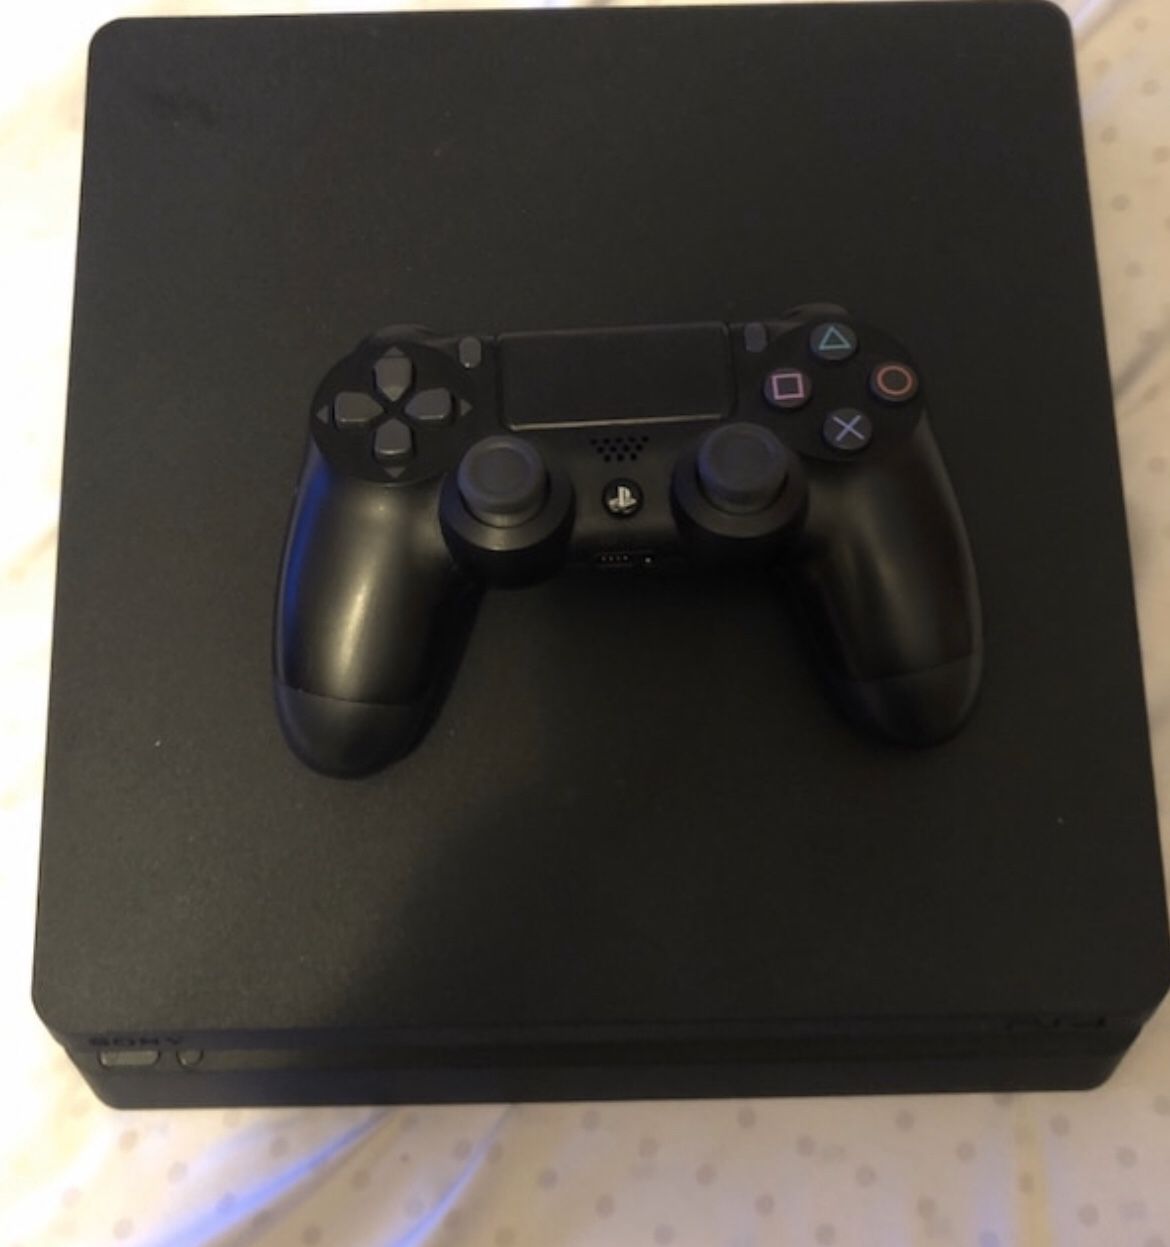 PS4 slim , comes with controller & cords